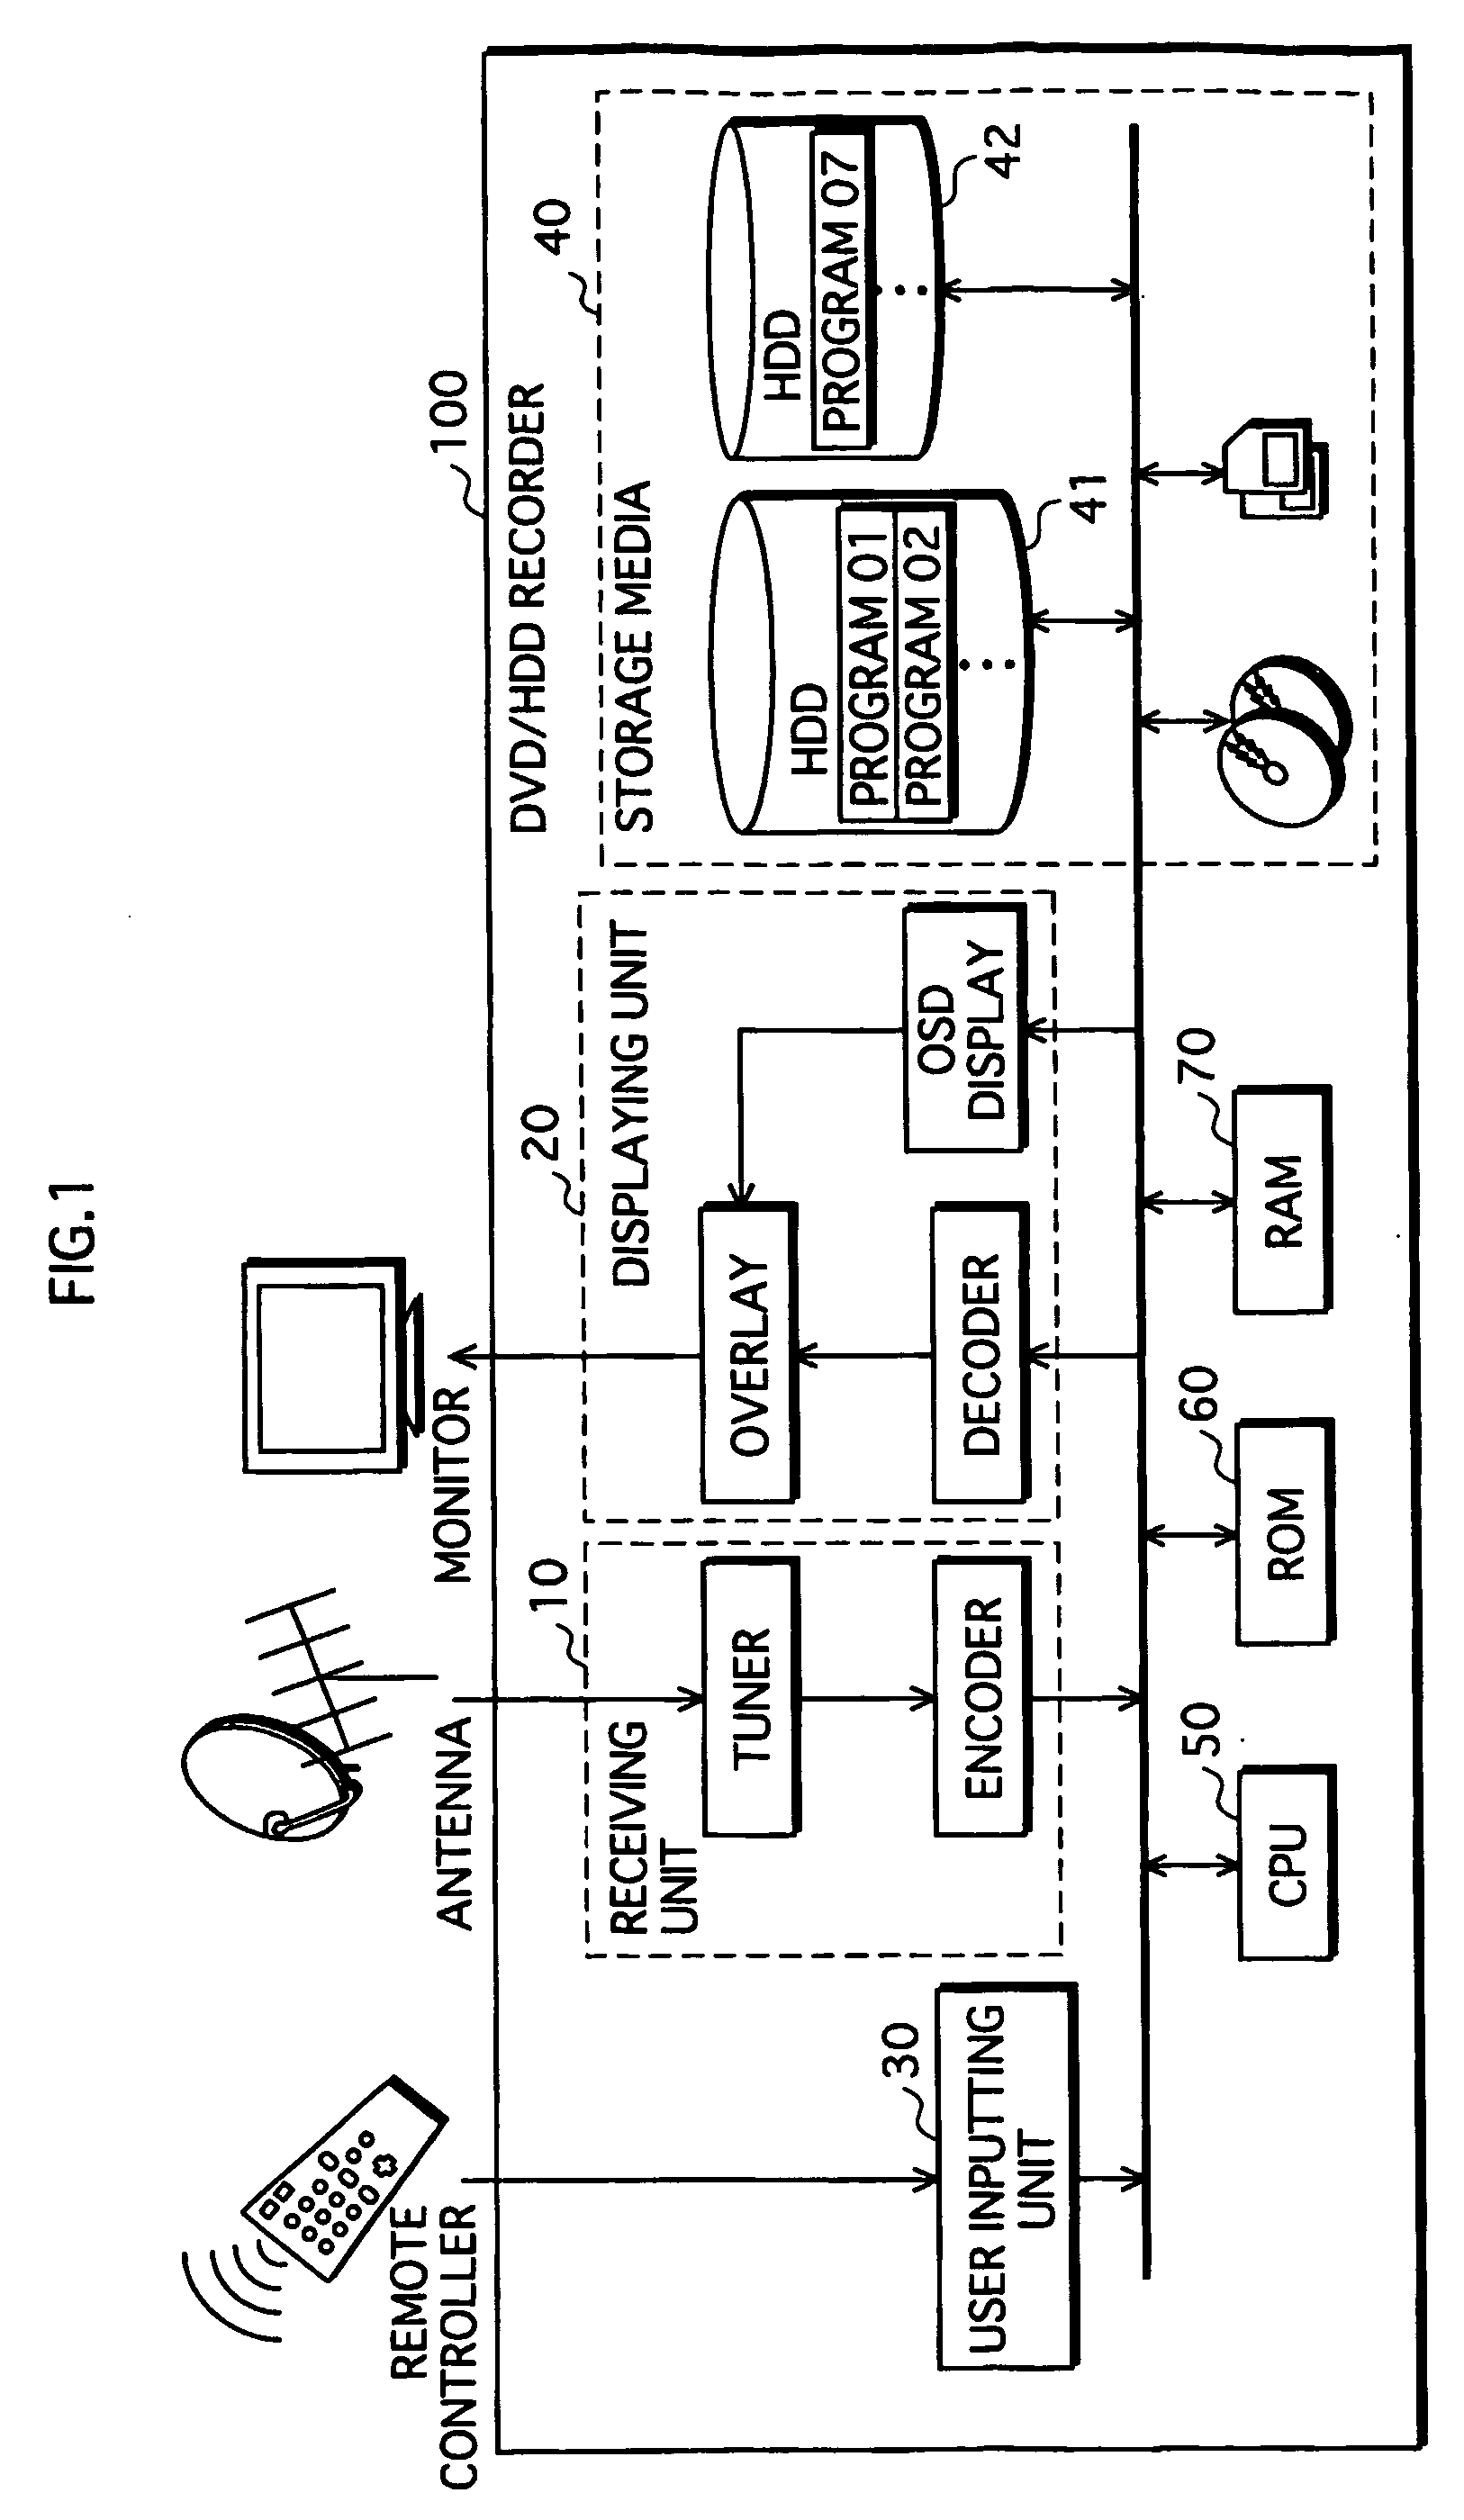 Apparatus for managing removable storage media that can be connected thereto, and method, program, and system lsi for managing removable storage media